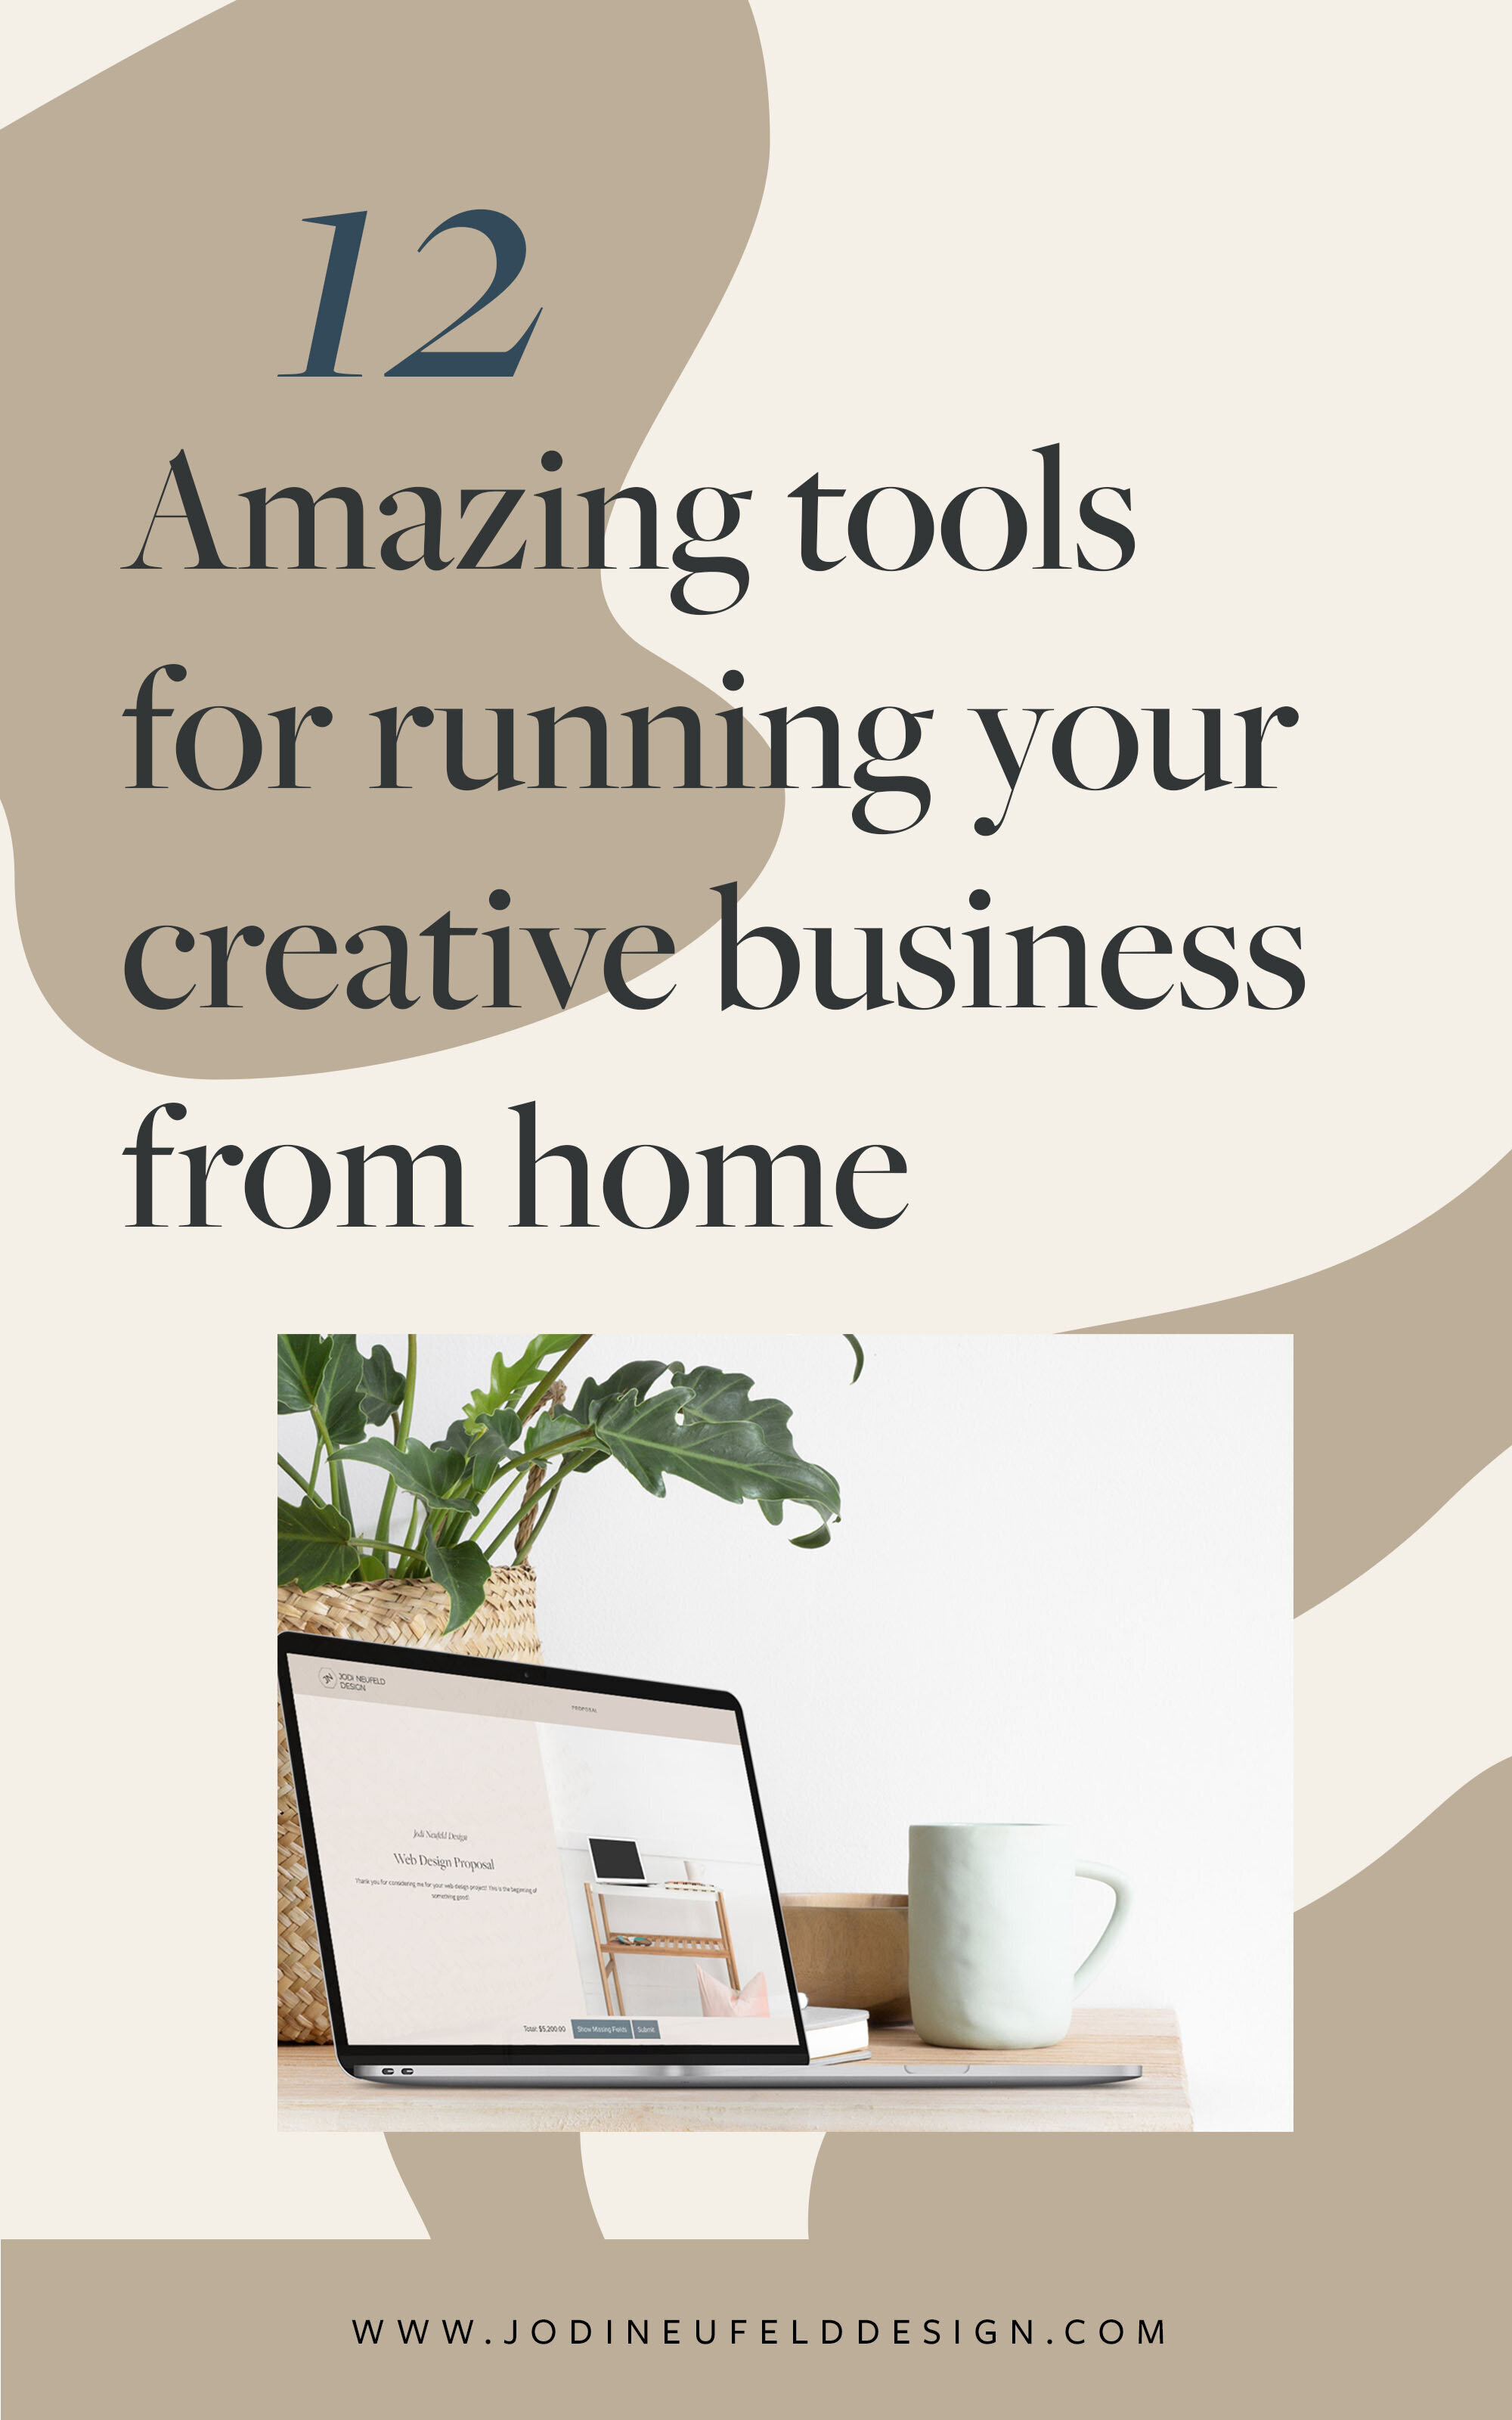 12 amazing tools for running your creative business from home